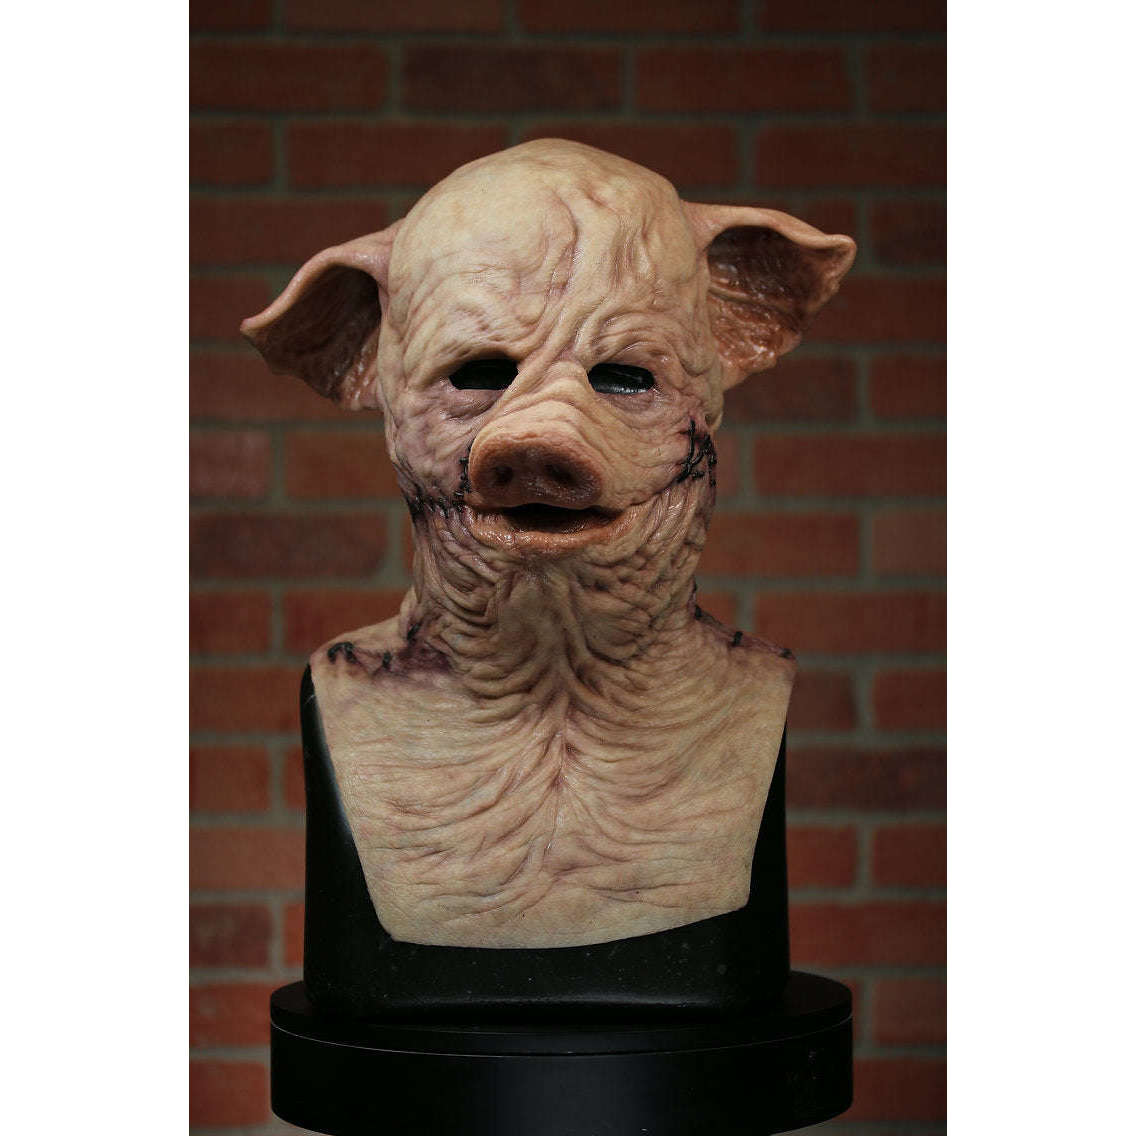 Squealer Pig Man Hyper Realistic Silicone Mask